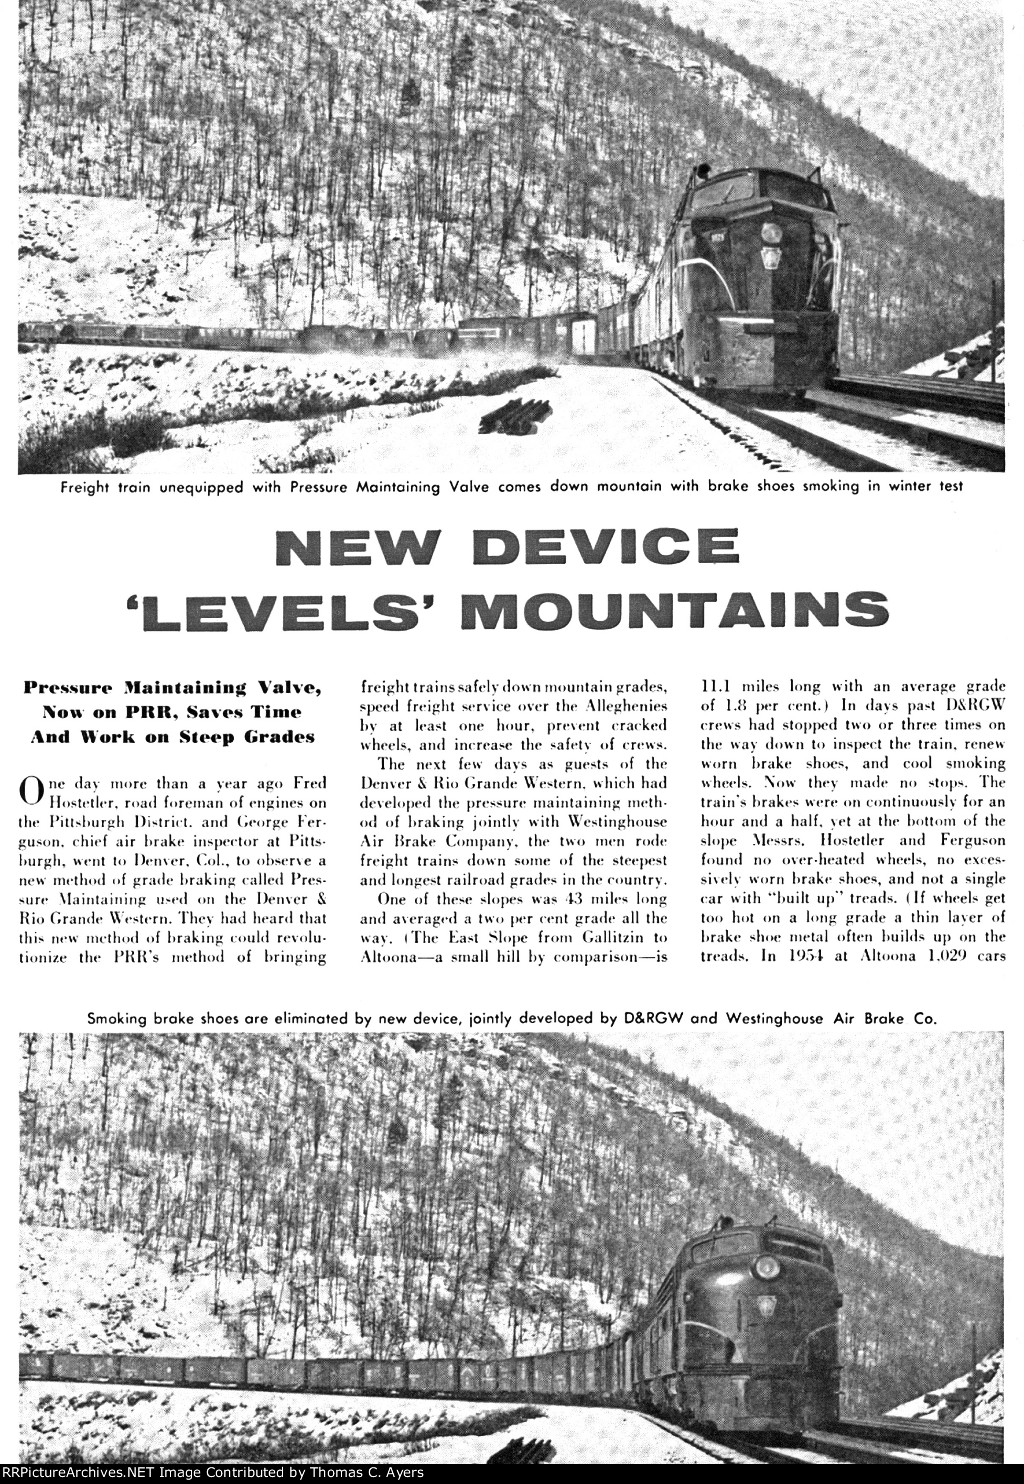 "New Device Levels Mountains," Page 4, 1956